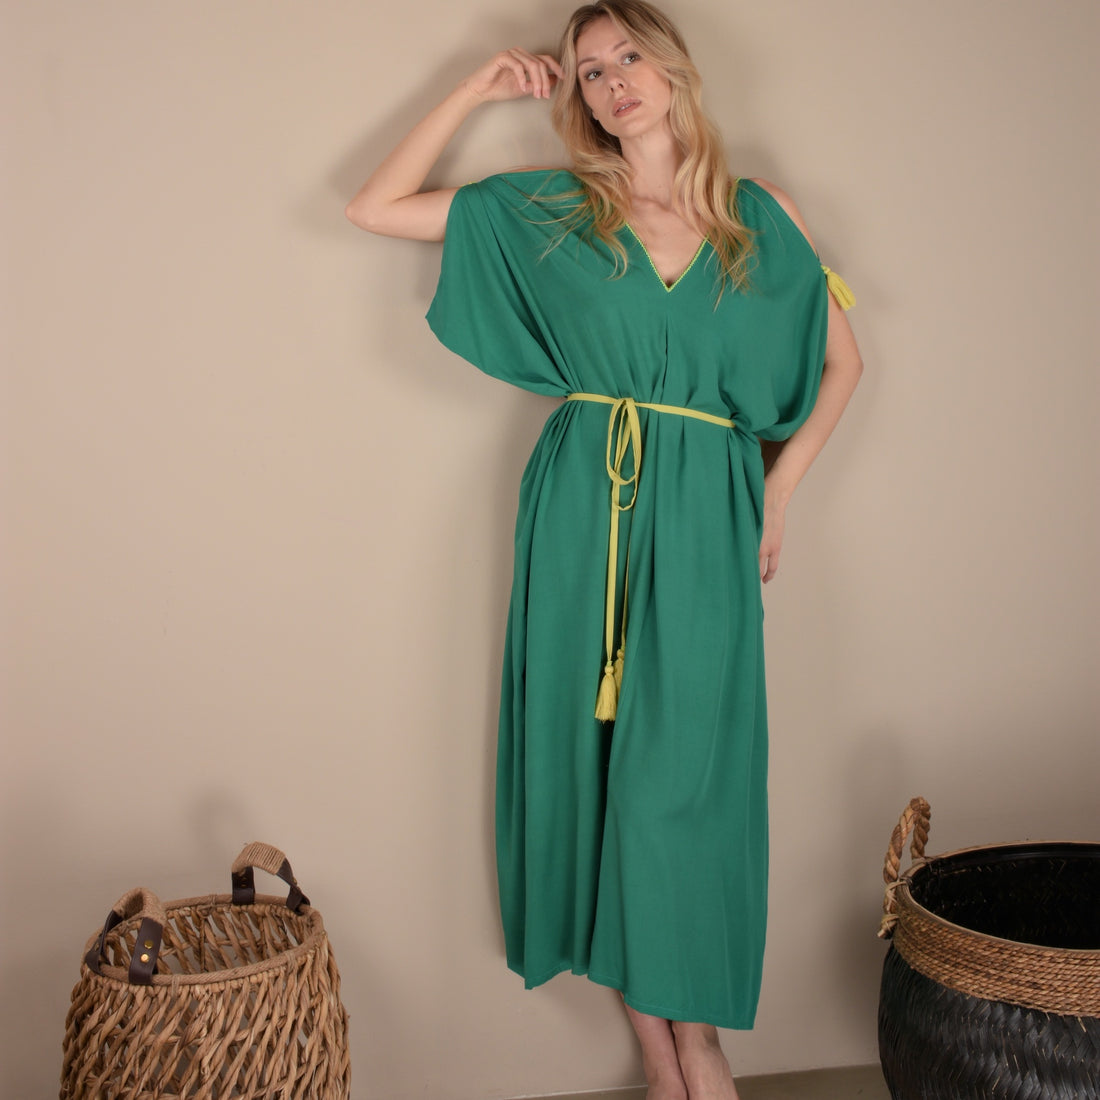 Green maxi dress and lime tassels and belt